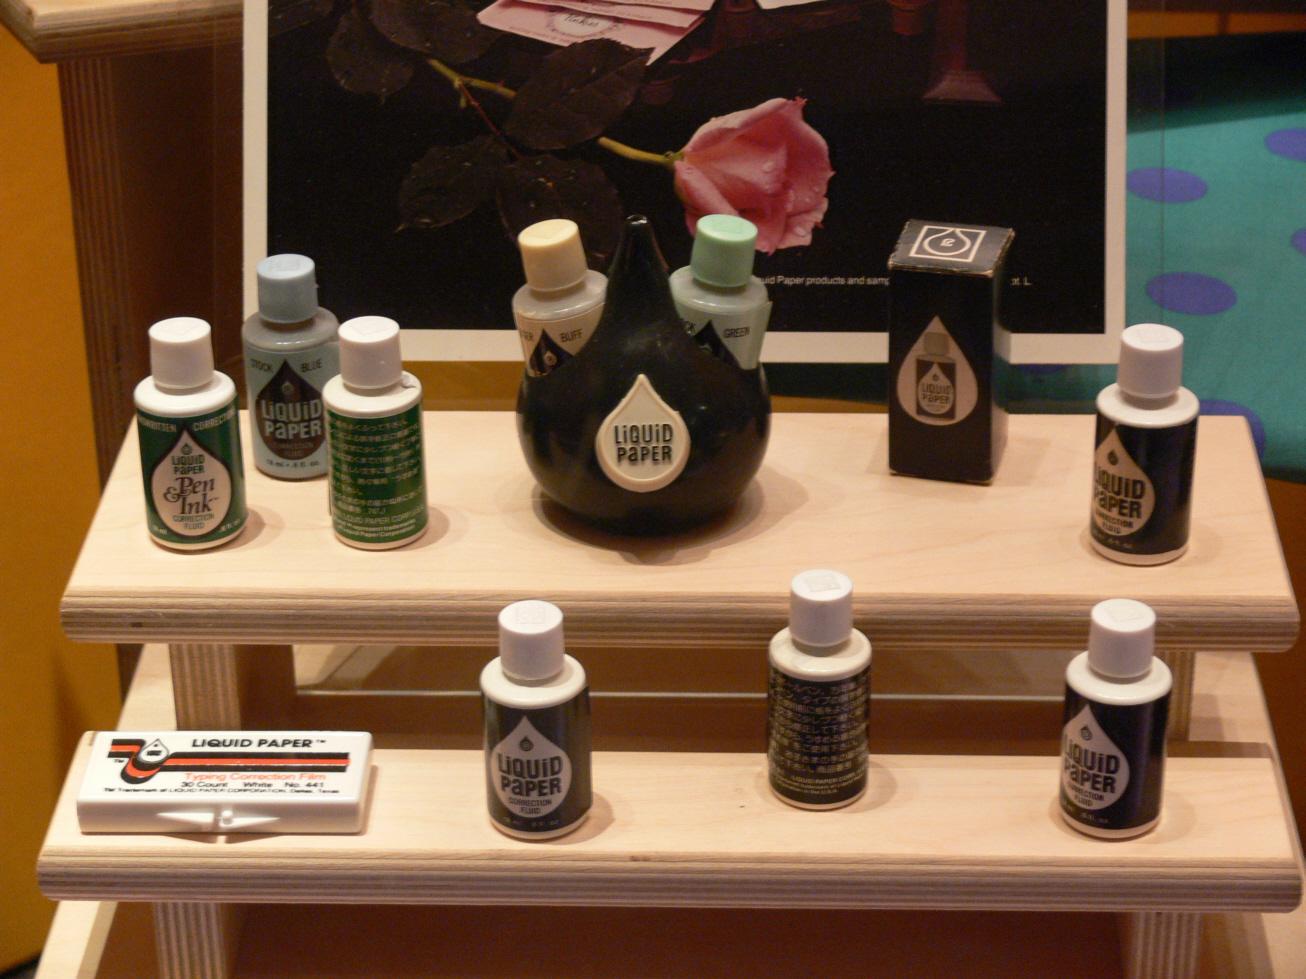 Liquid Paper collection at The Women's Museum in Dallas